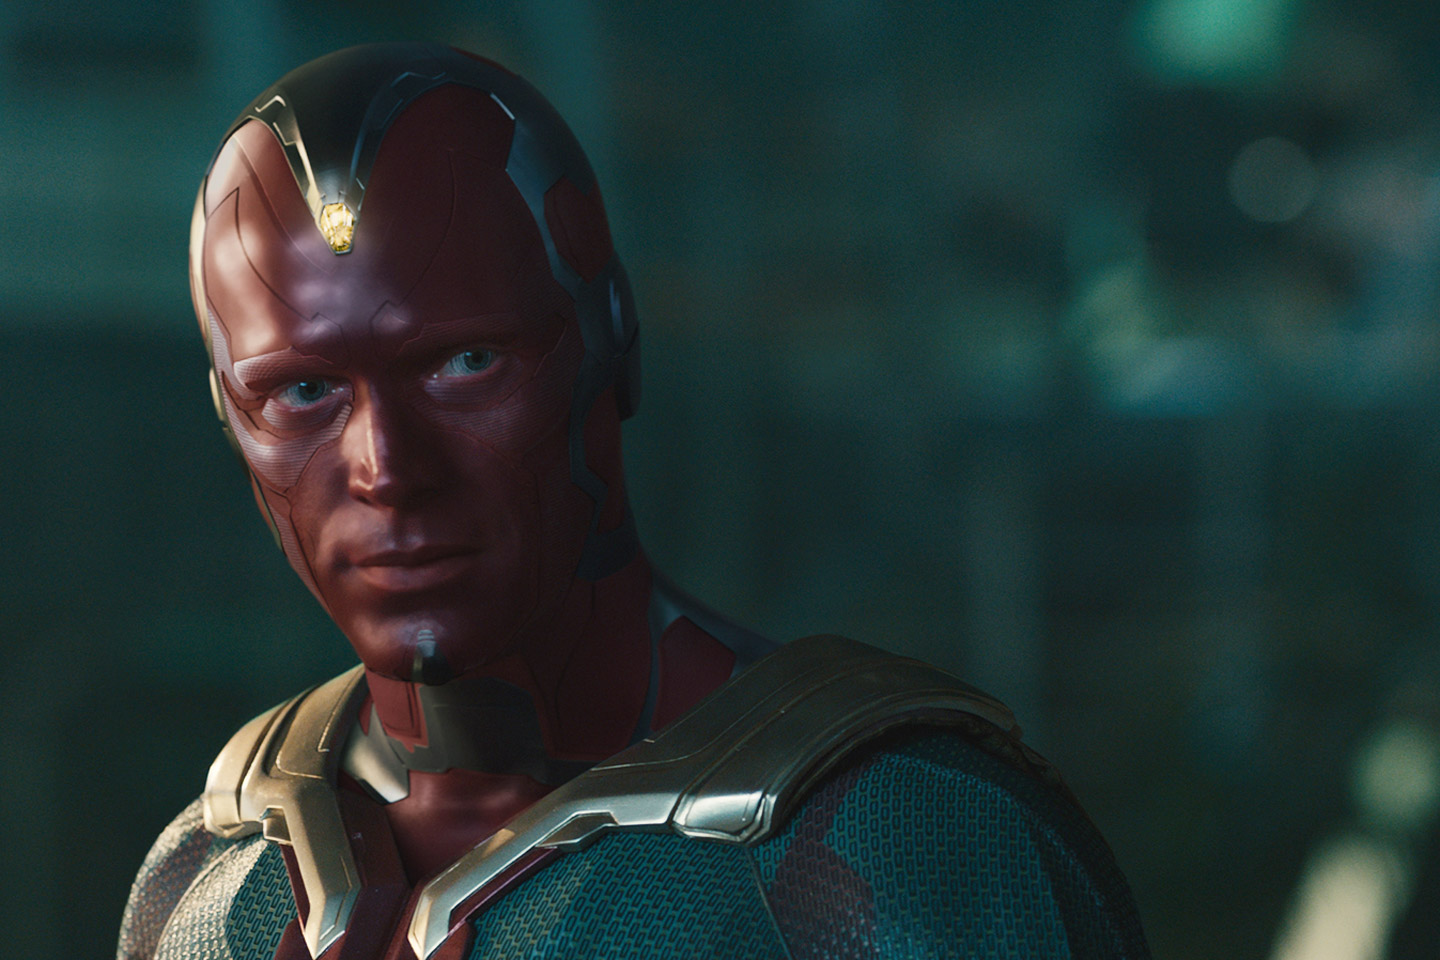 Vision (Paul Bettany) in Avengers: Age of Ultron (2015)